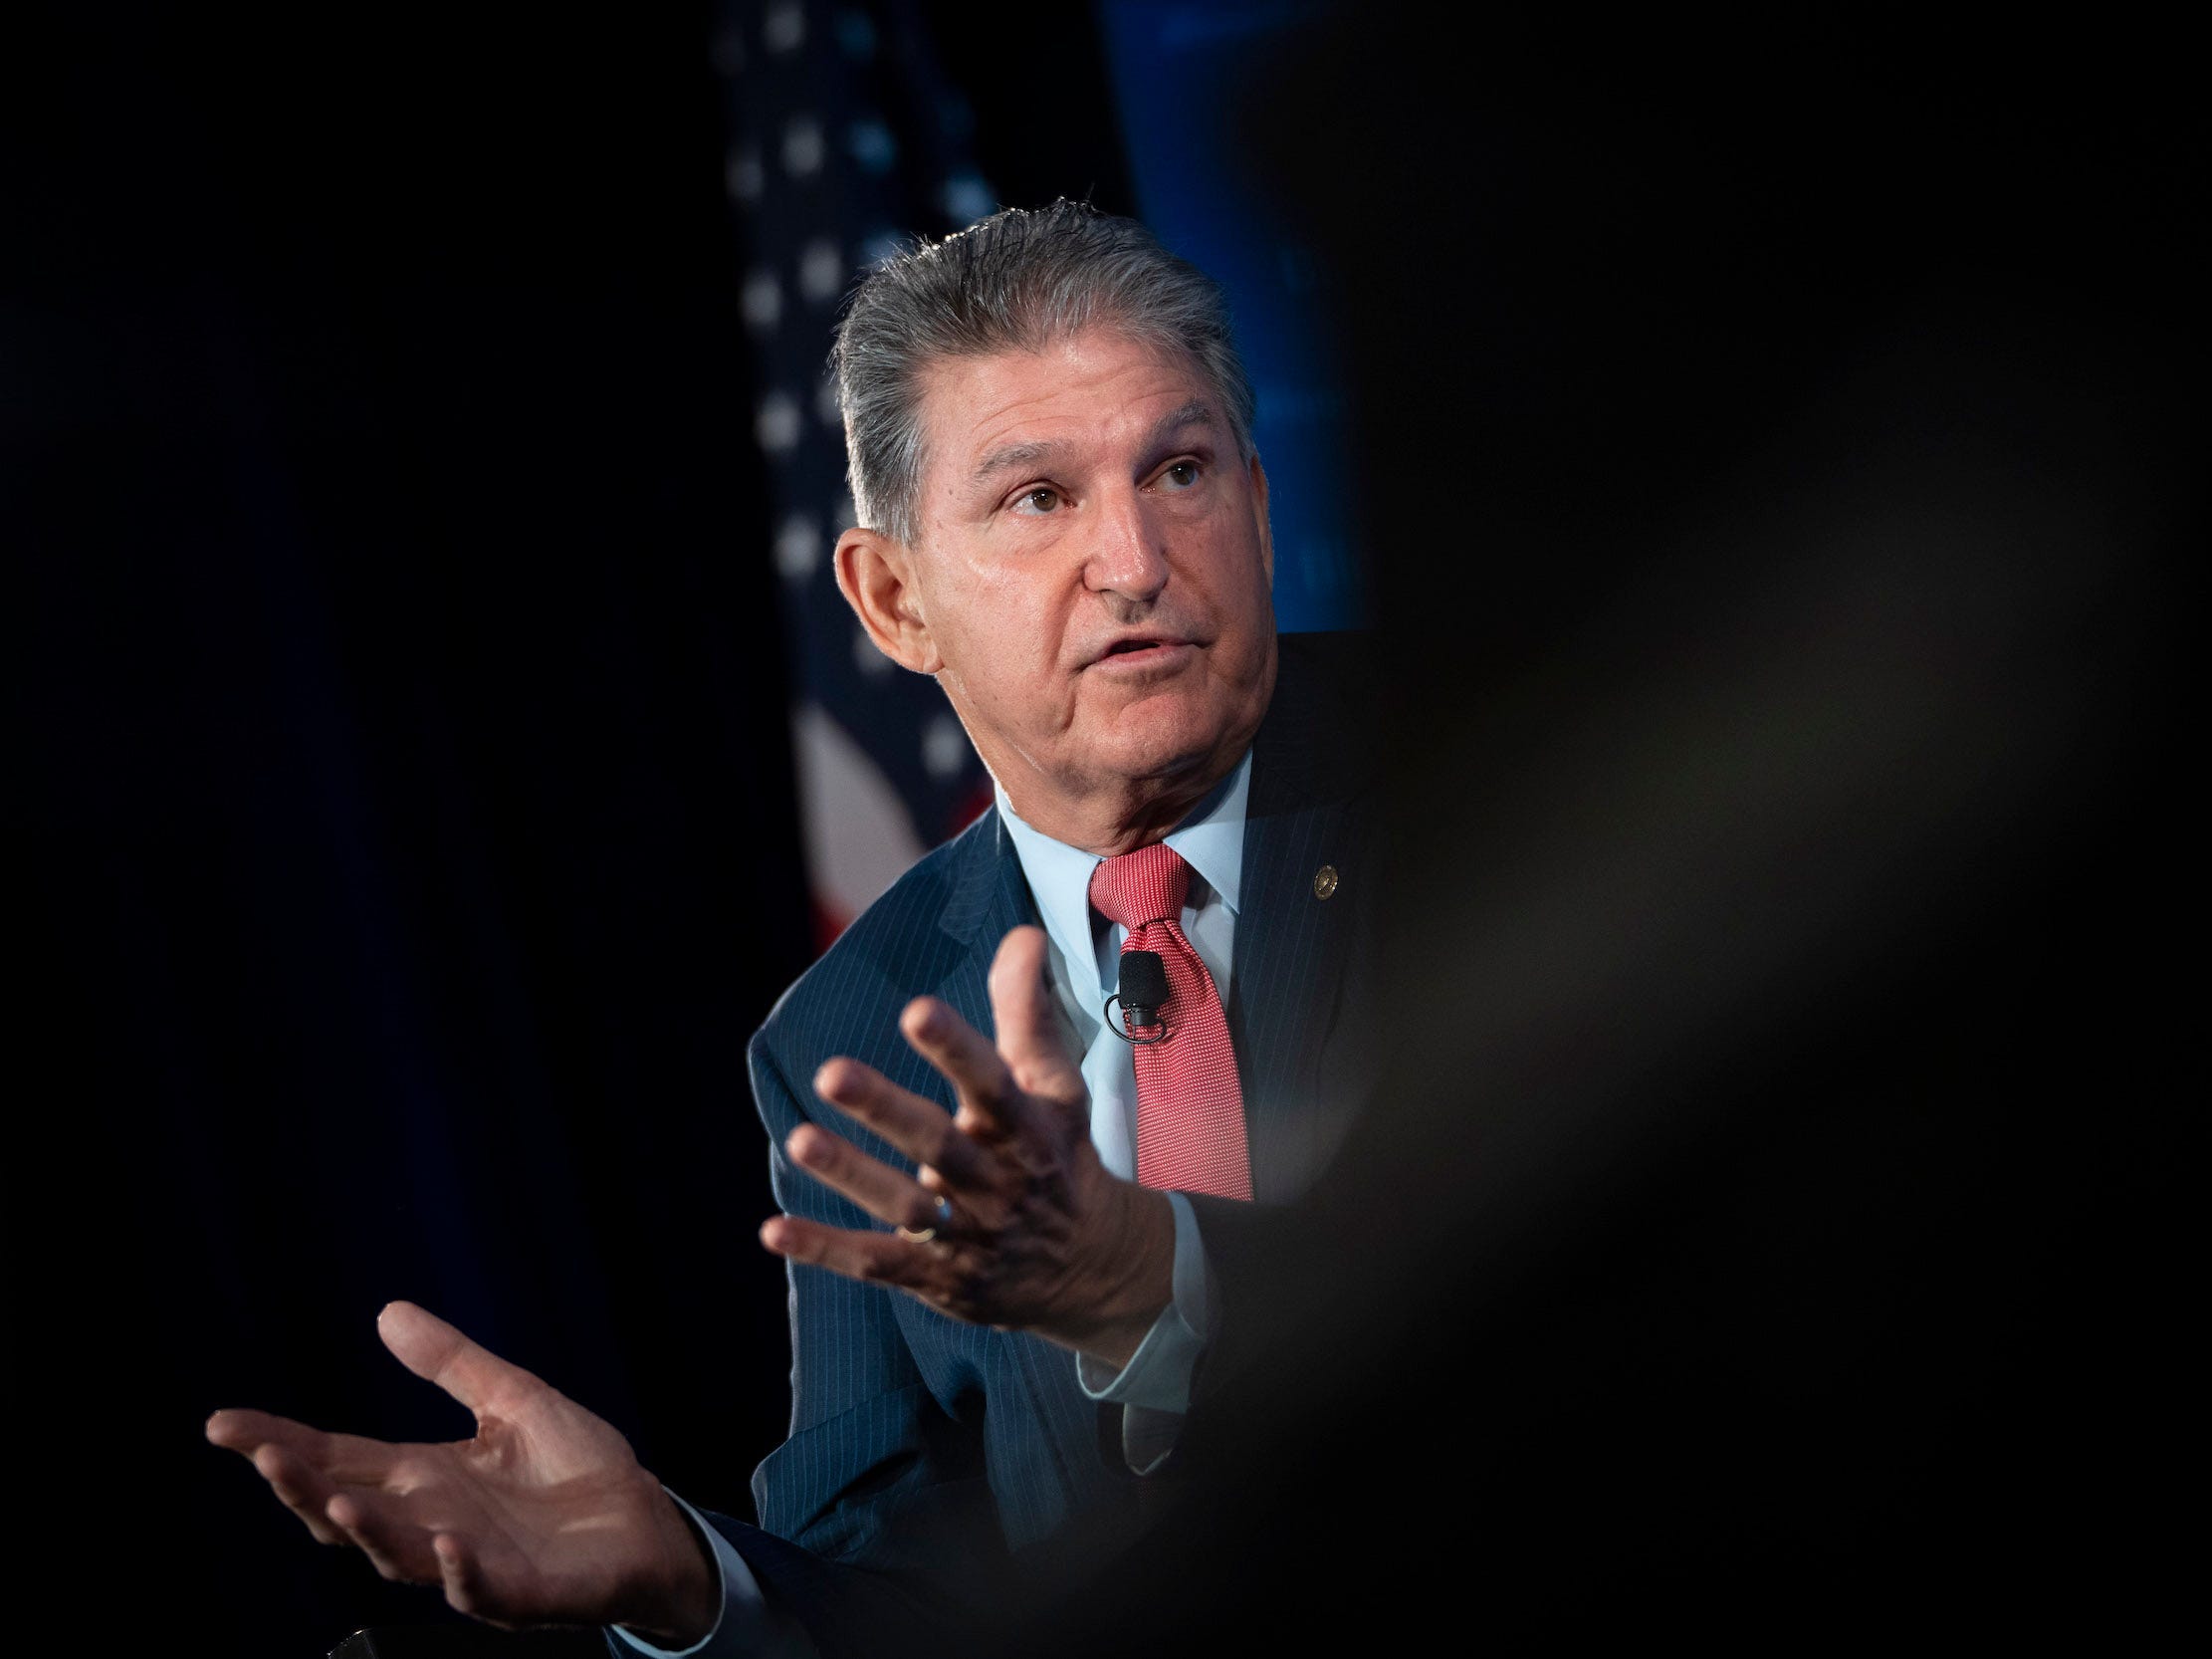 Senator Joe Manchin gestures in front of an American flag with his palms up, the right half of the photo is blurred out in black.